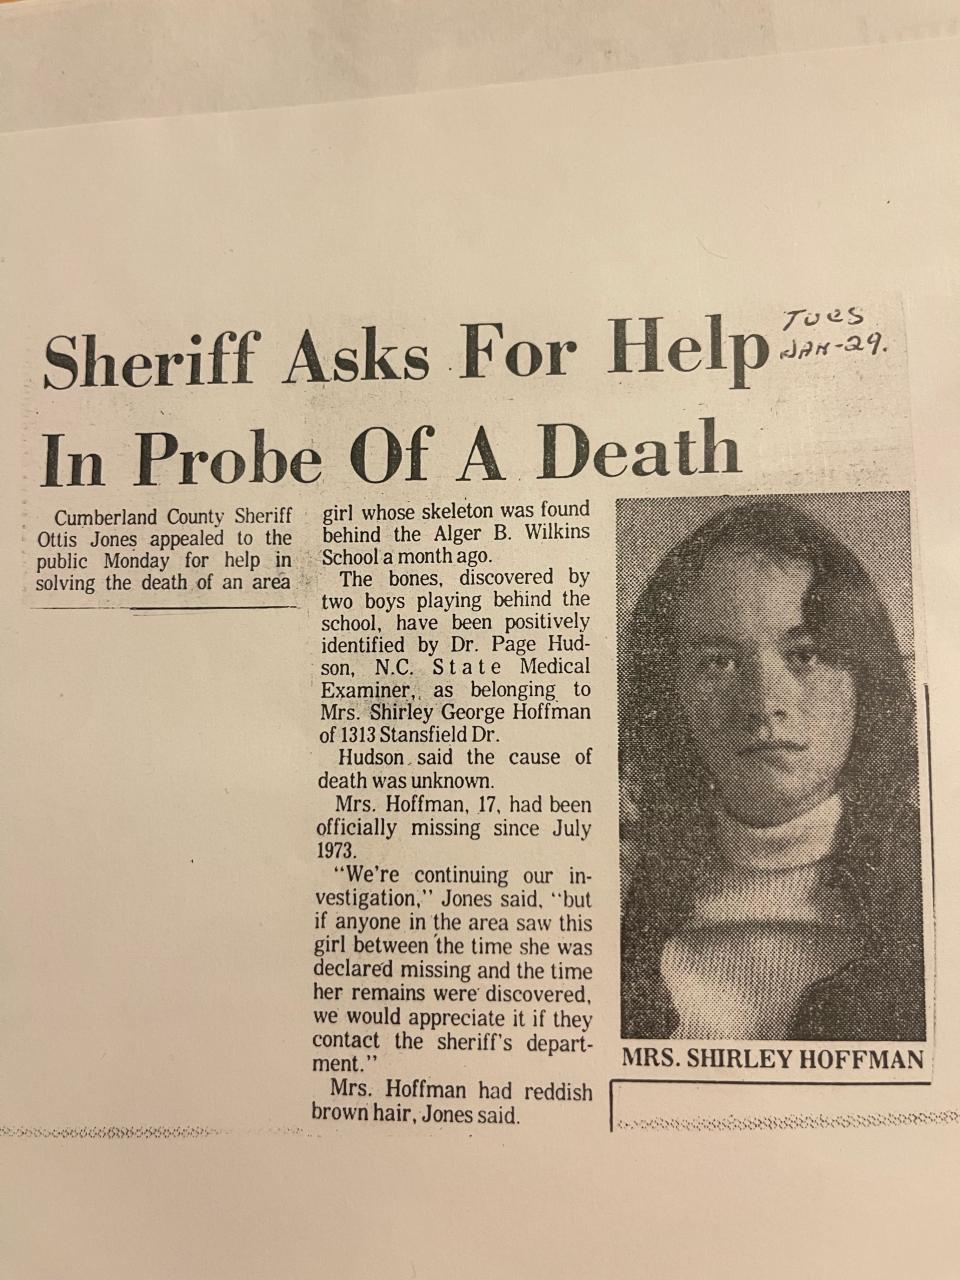 A newspaper clipping shows Cumberland County Sheriff's Office asking for the public's help with information in the 1973 death case of Shirley George Hoffman.